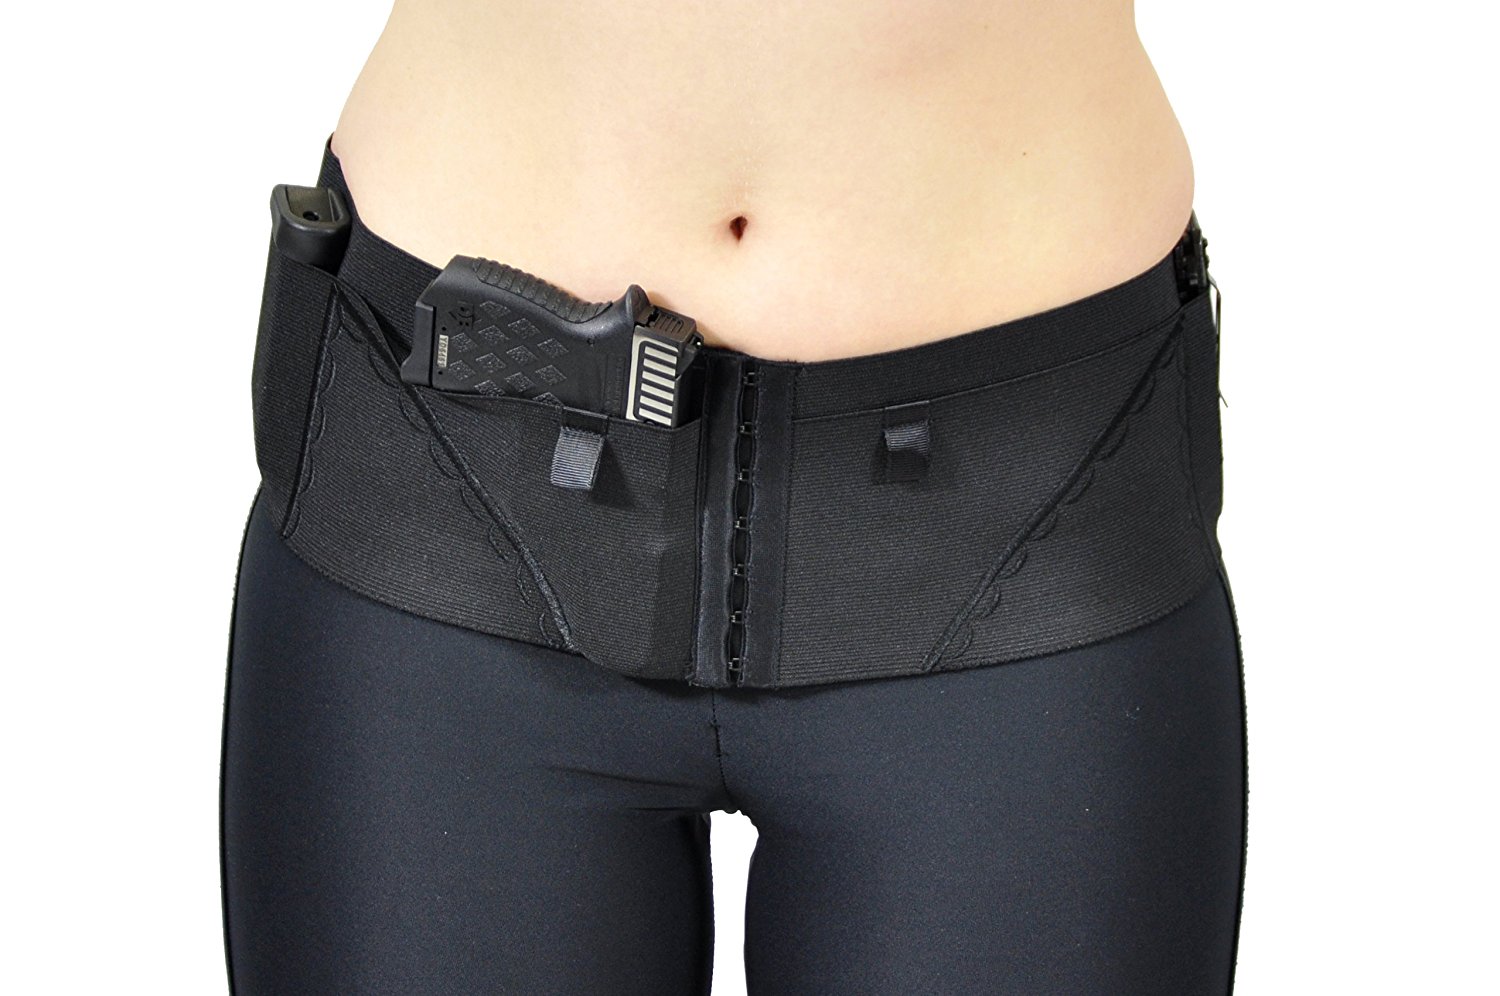 Best Holsters For Women: Conceal Carry Holsters for Women Reviews ...